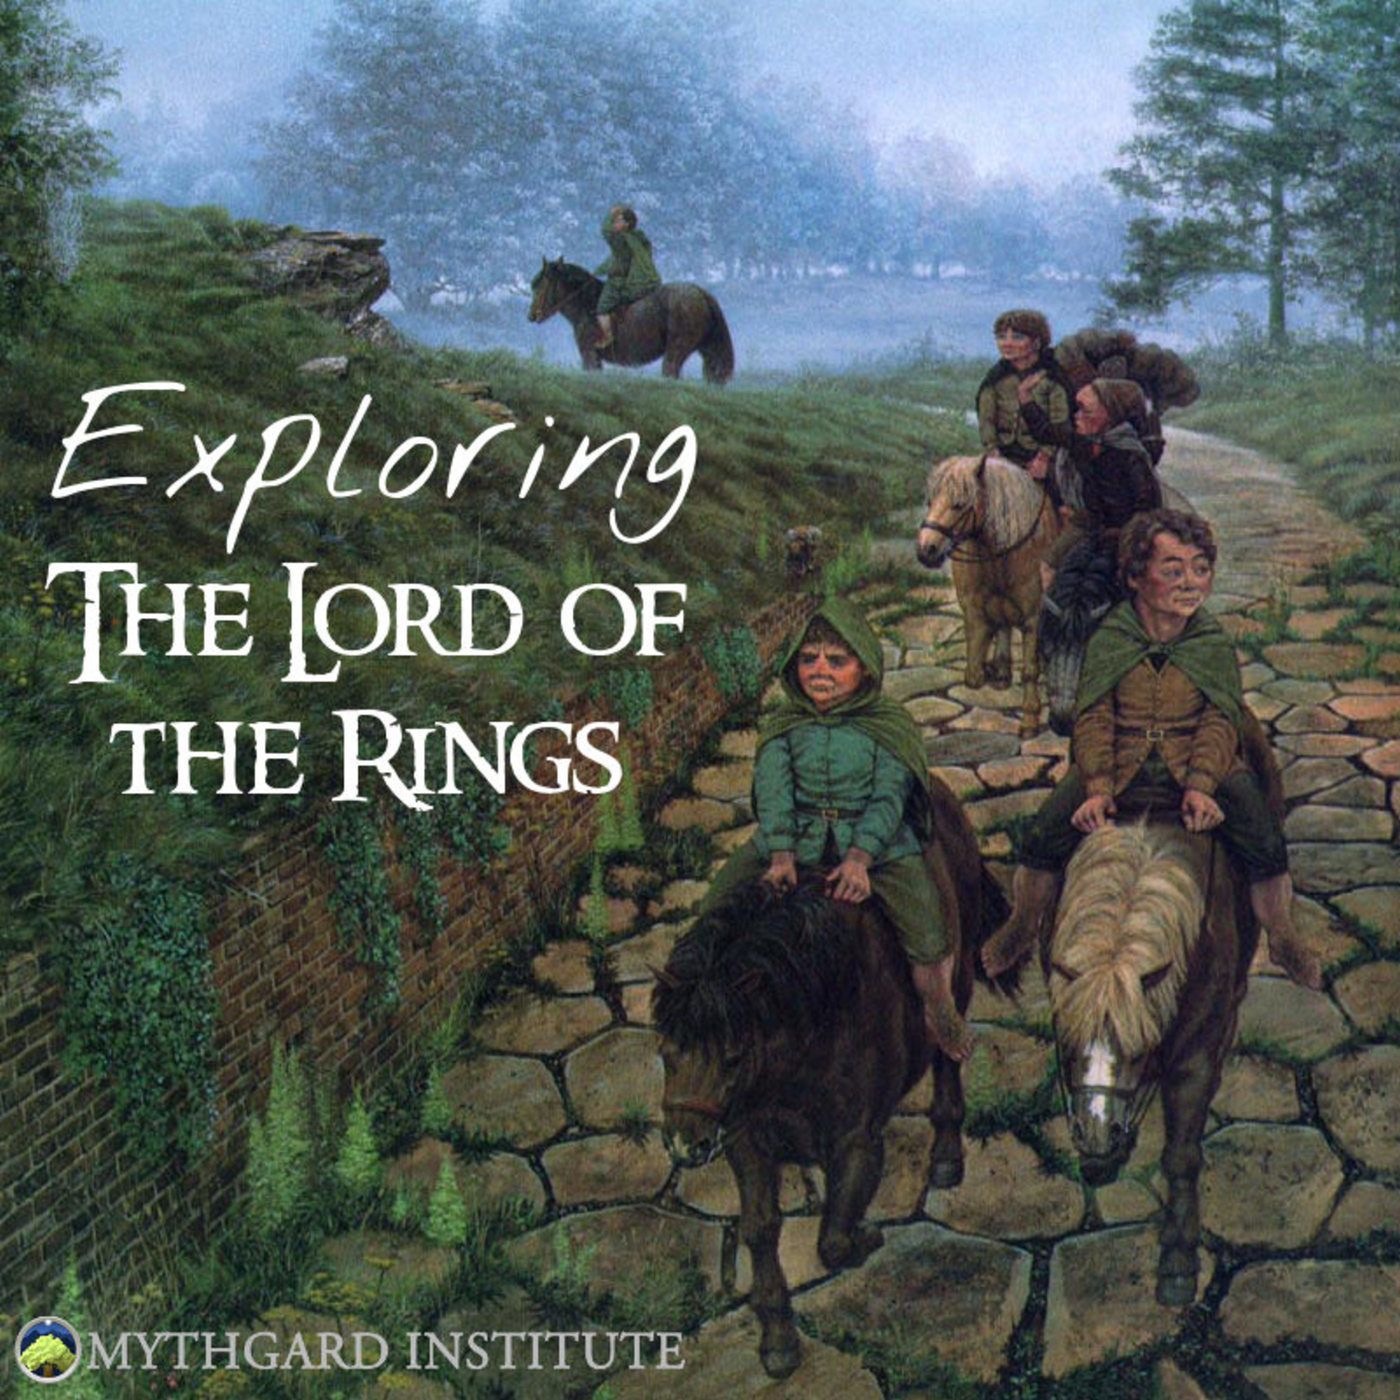 Mythgard's Exploring The Lord of the Rings cover